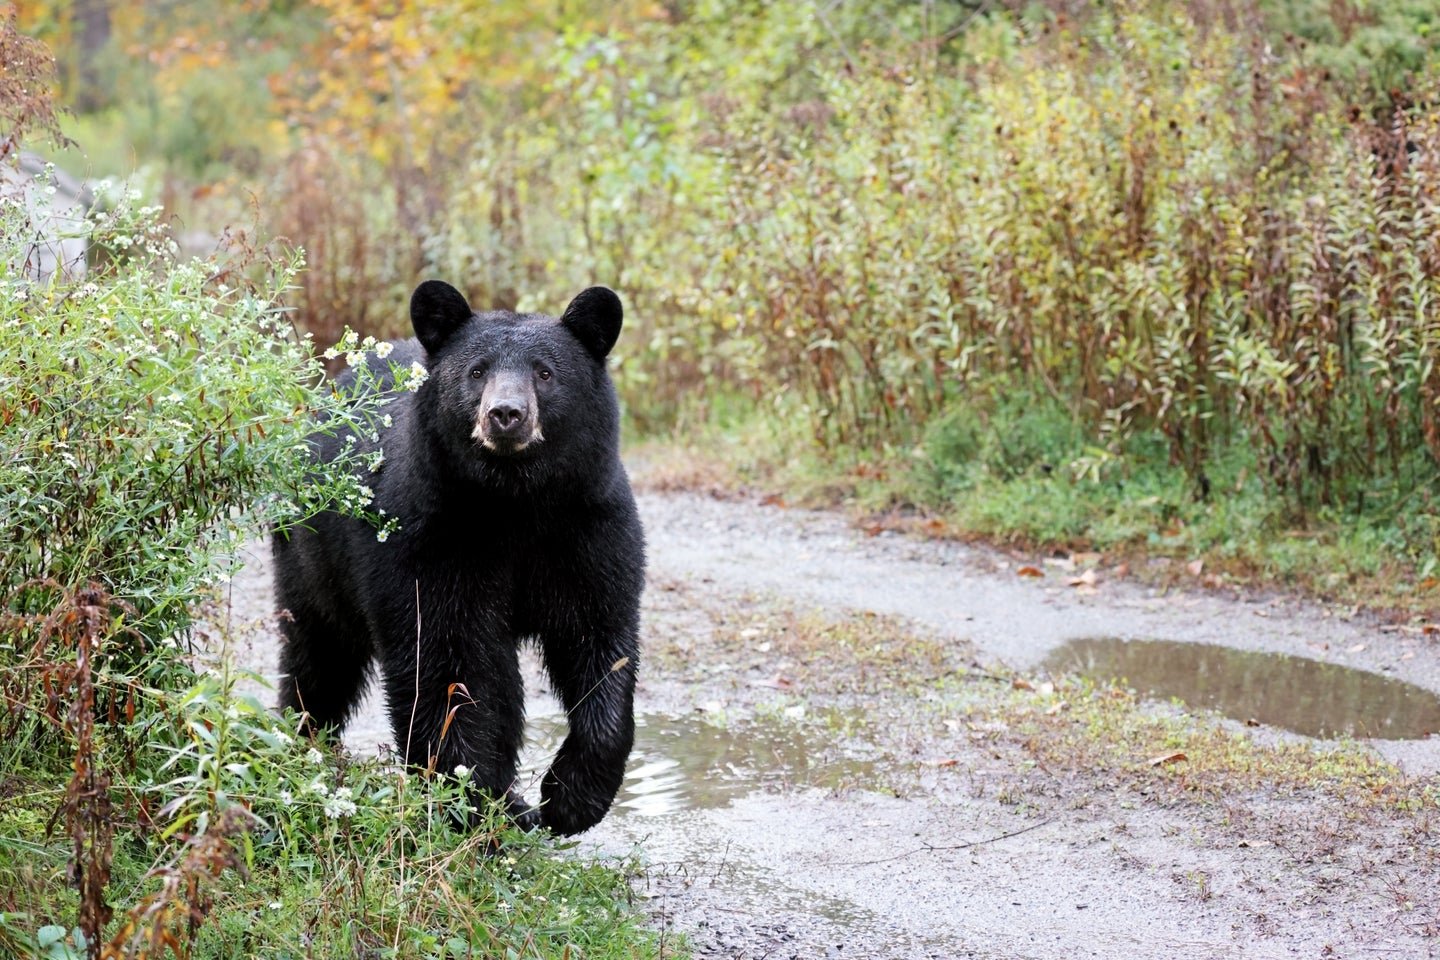 Officials Kill 5th Bear at Anchorage Campground Sheltering Homeless Community